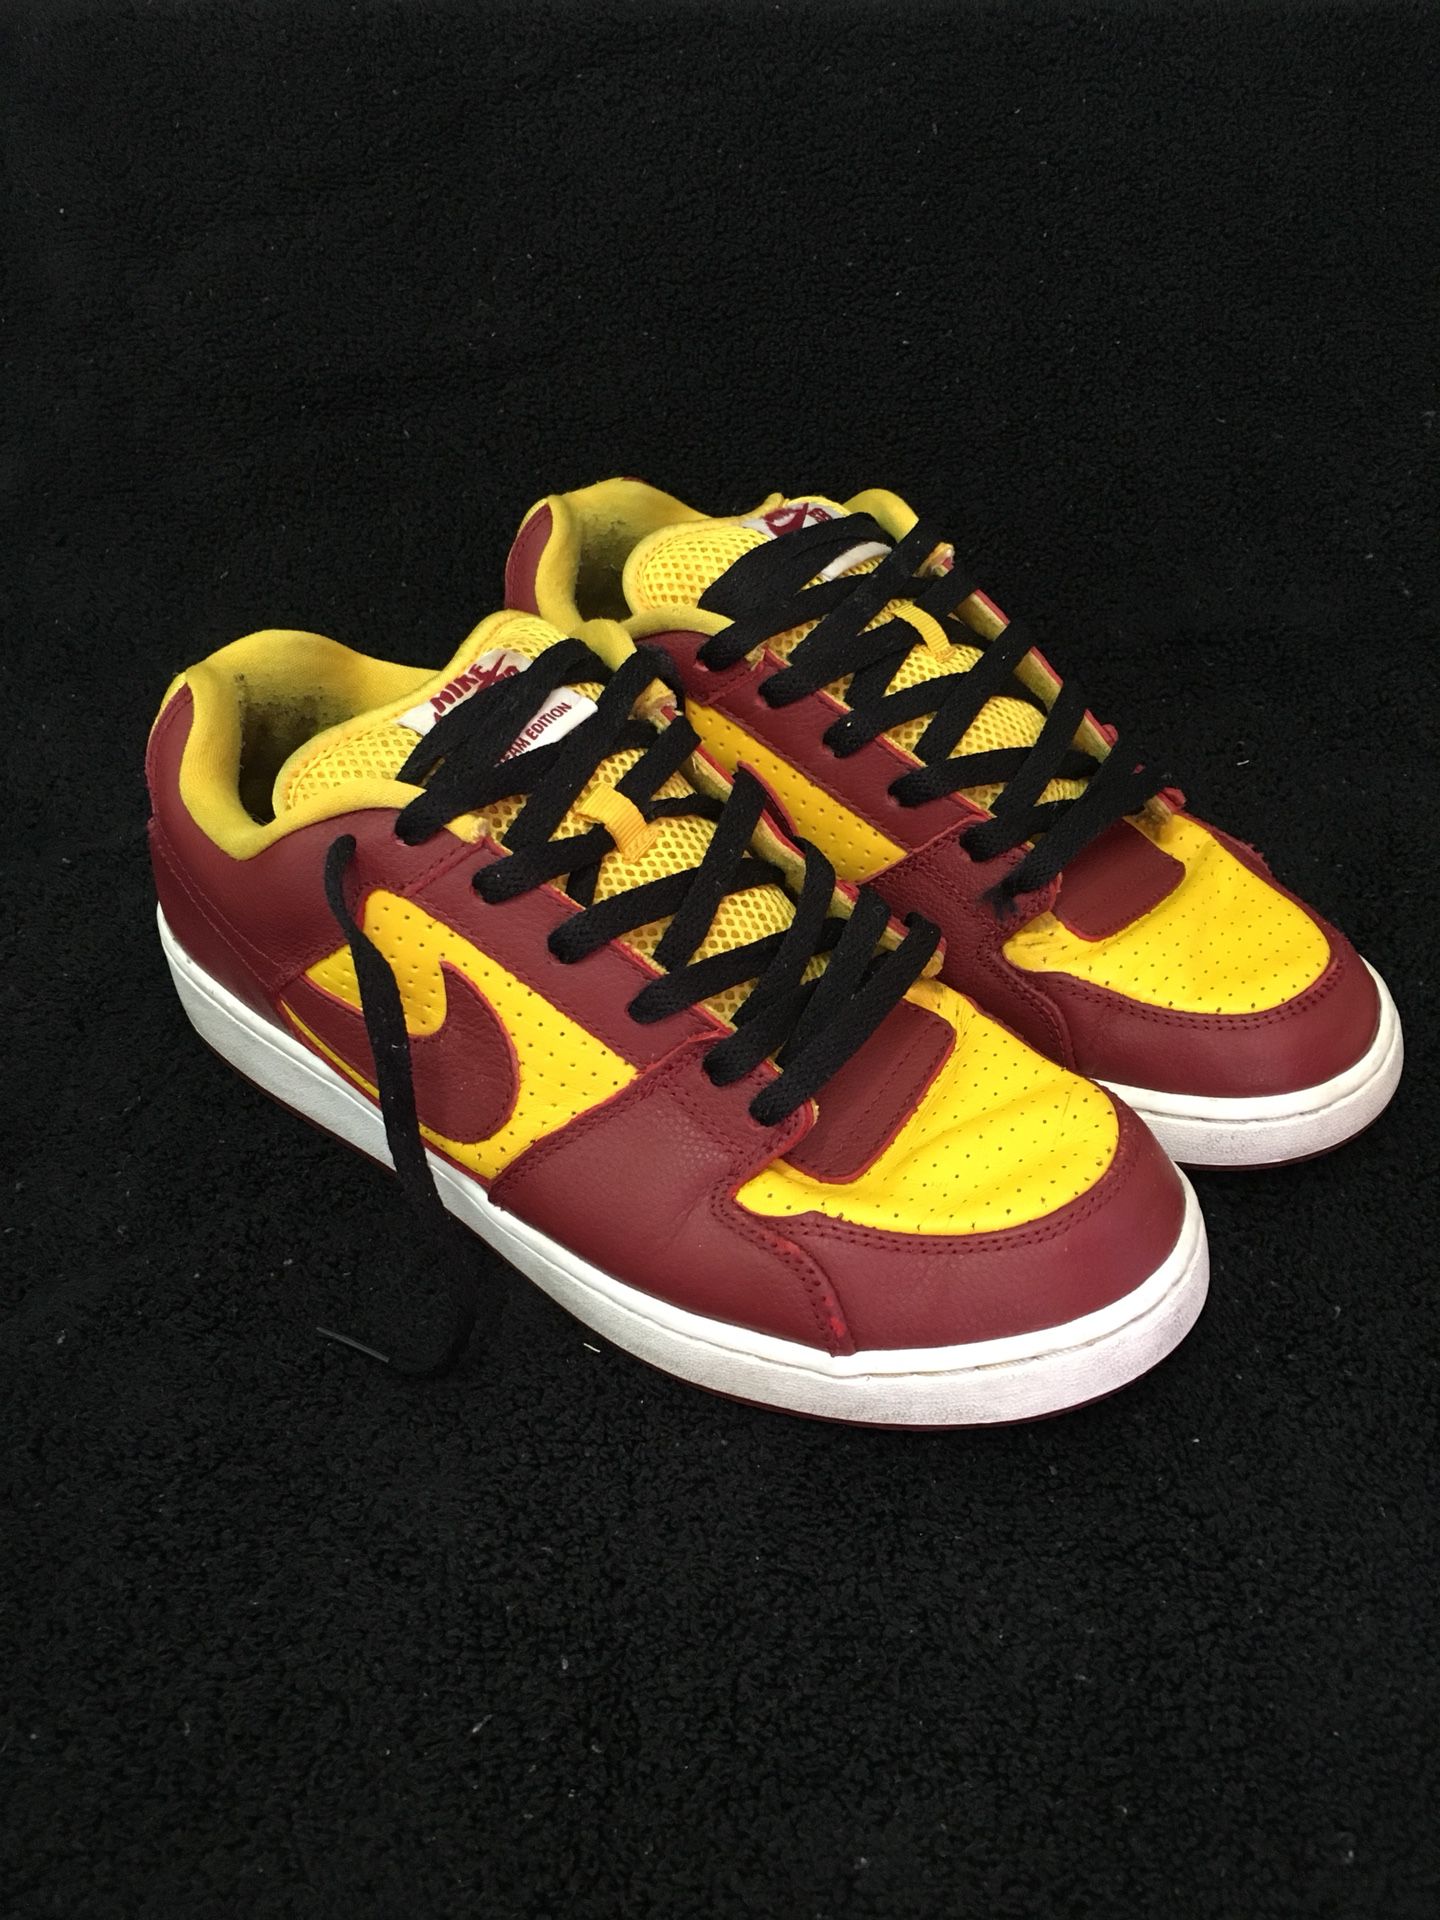 USC Trojans Nike SB Zoom Team Edition mens size 10 for in Colton, CA - OfferUp